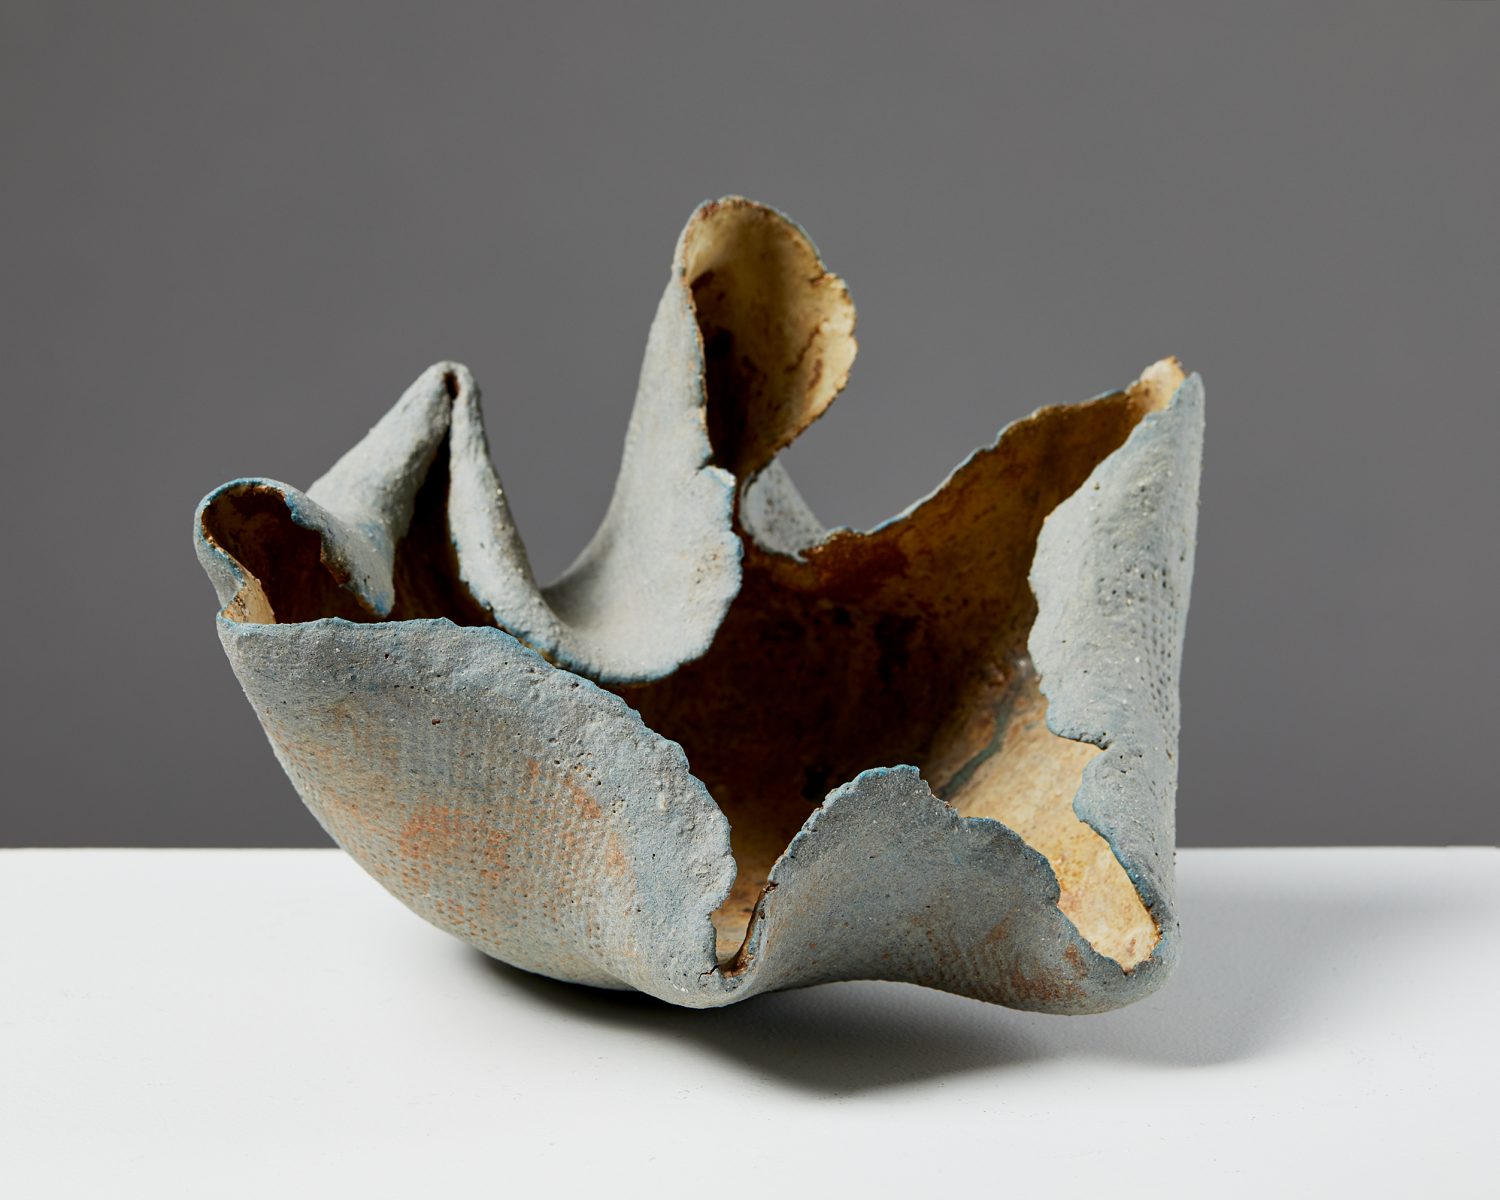 Loose Powerful Arena Bowl/sculpture designed by Tyra Lundgren, — Modernity